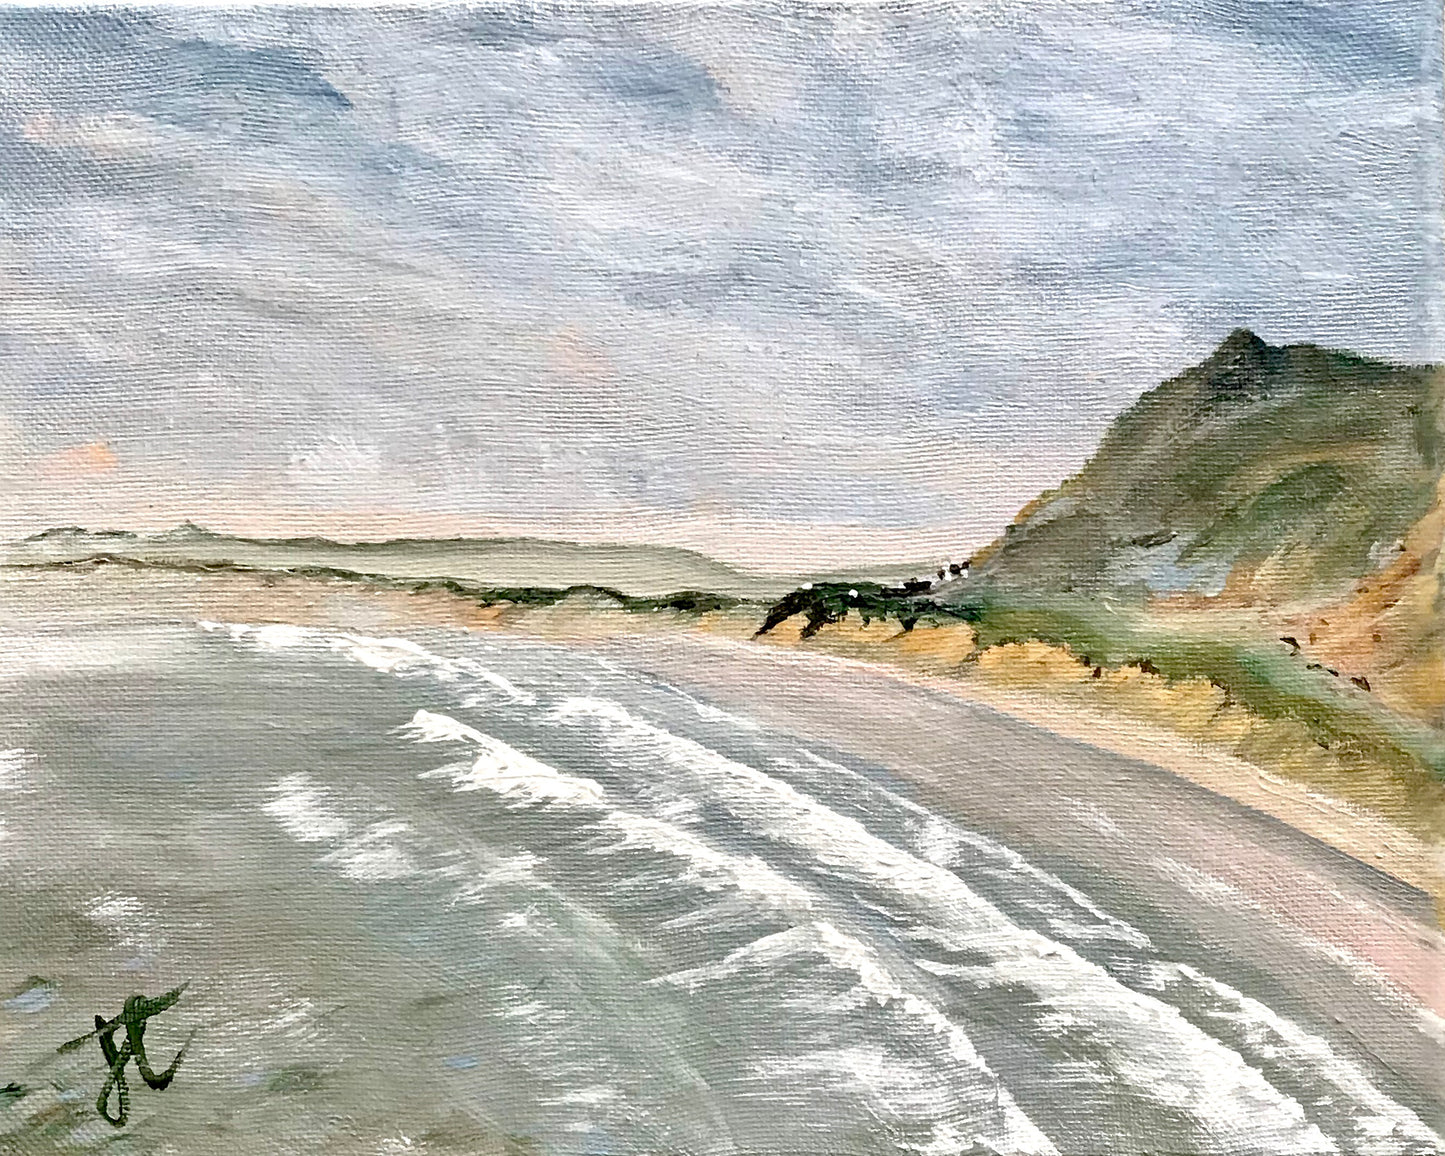 Seascape painting: ocean waves breaking onto a beach in front of dunes and hilliside.